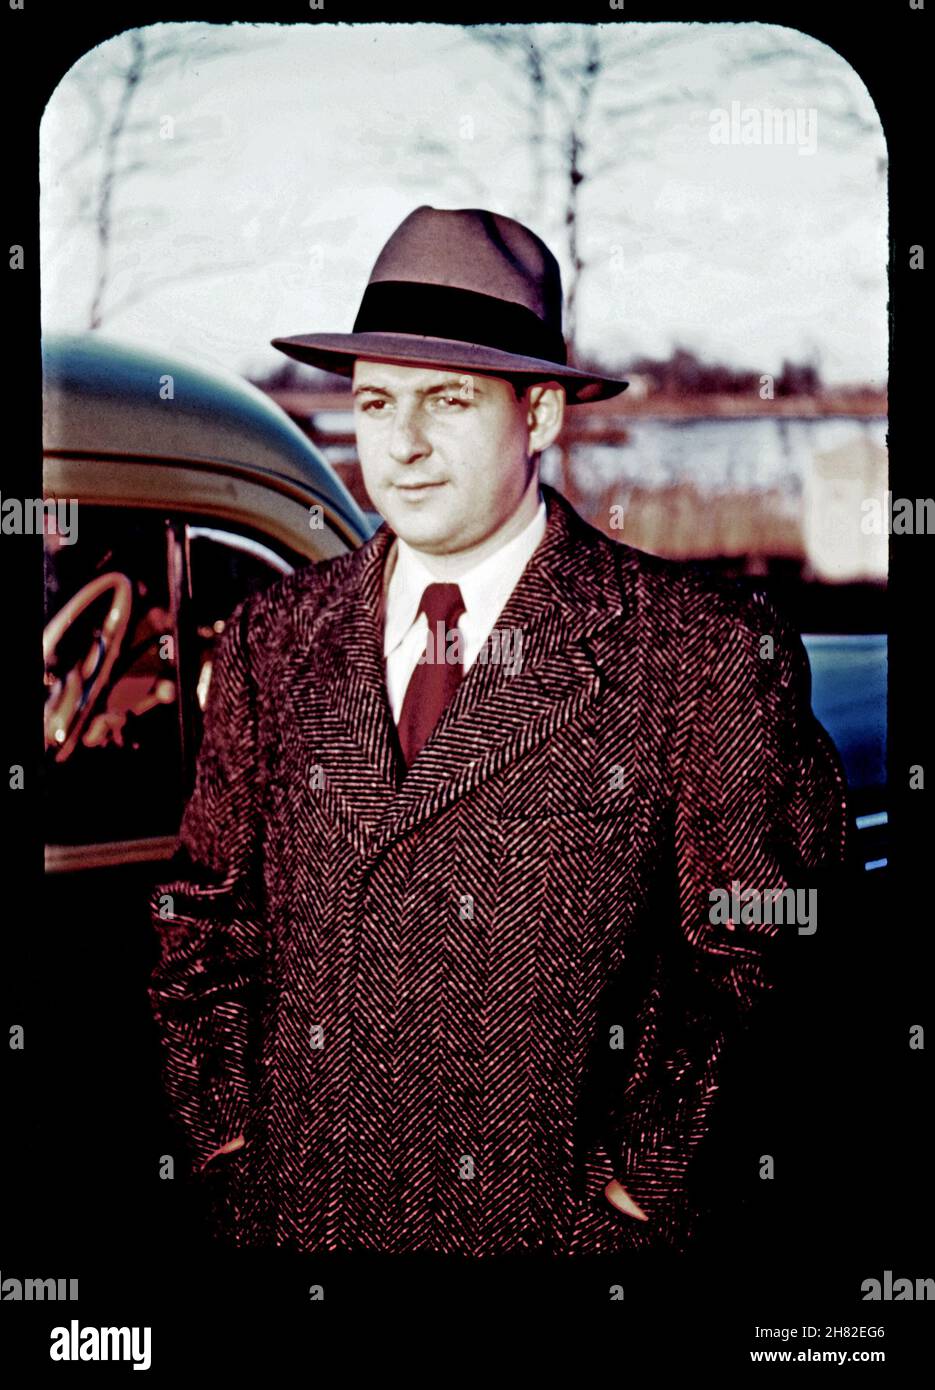 Vintage Kodachrome slide circa 1949 of a young man in his 20s dressed in tweed overcoat, hat, tie and white shirt by a 1940s automobile. Stock Photo